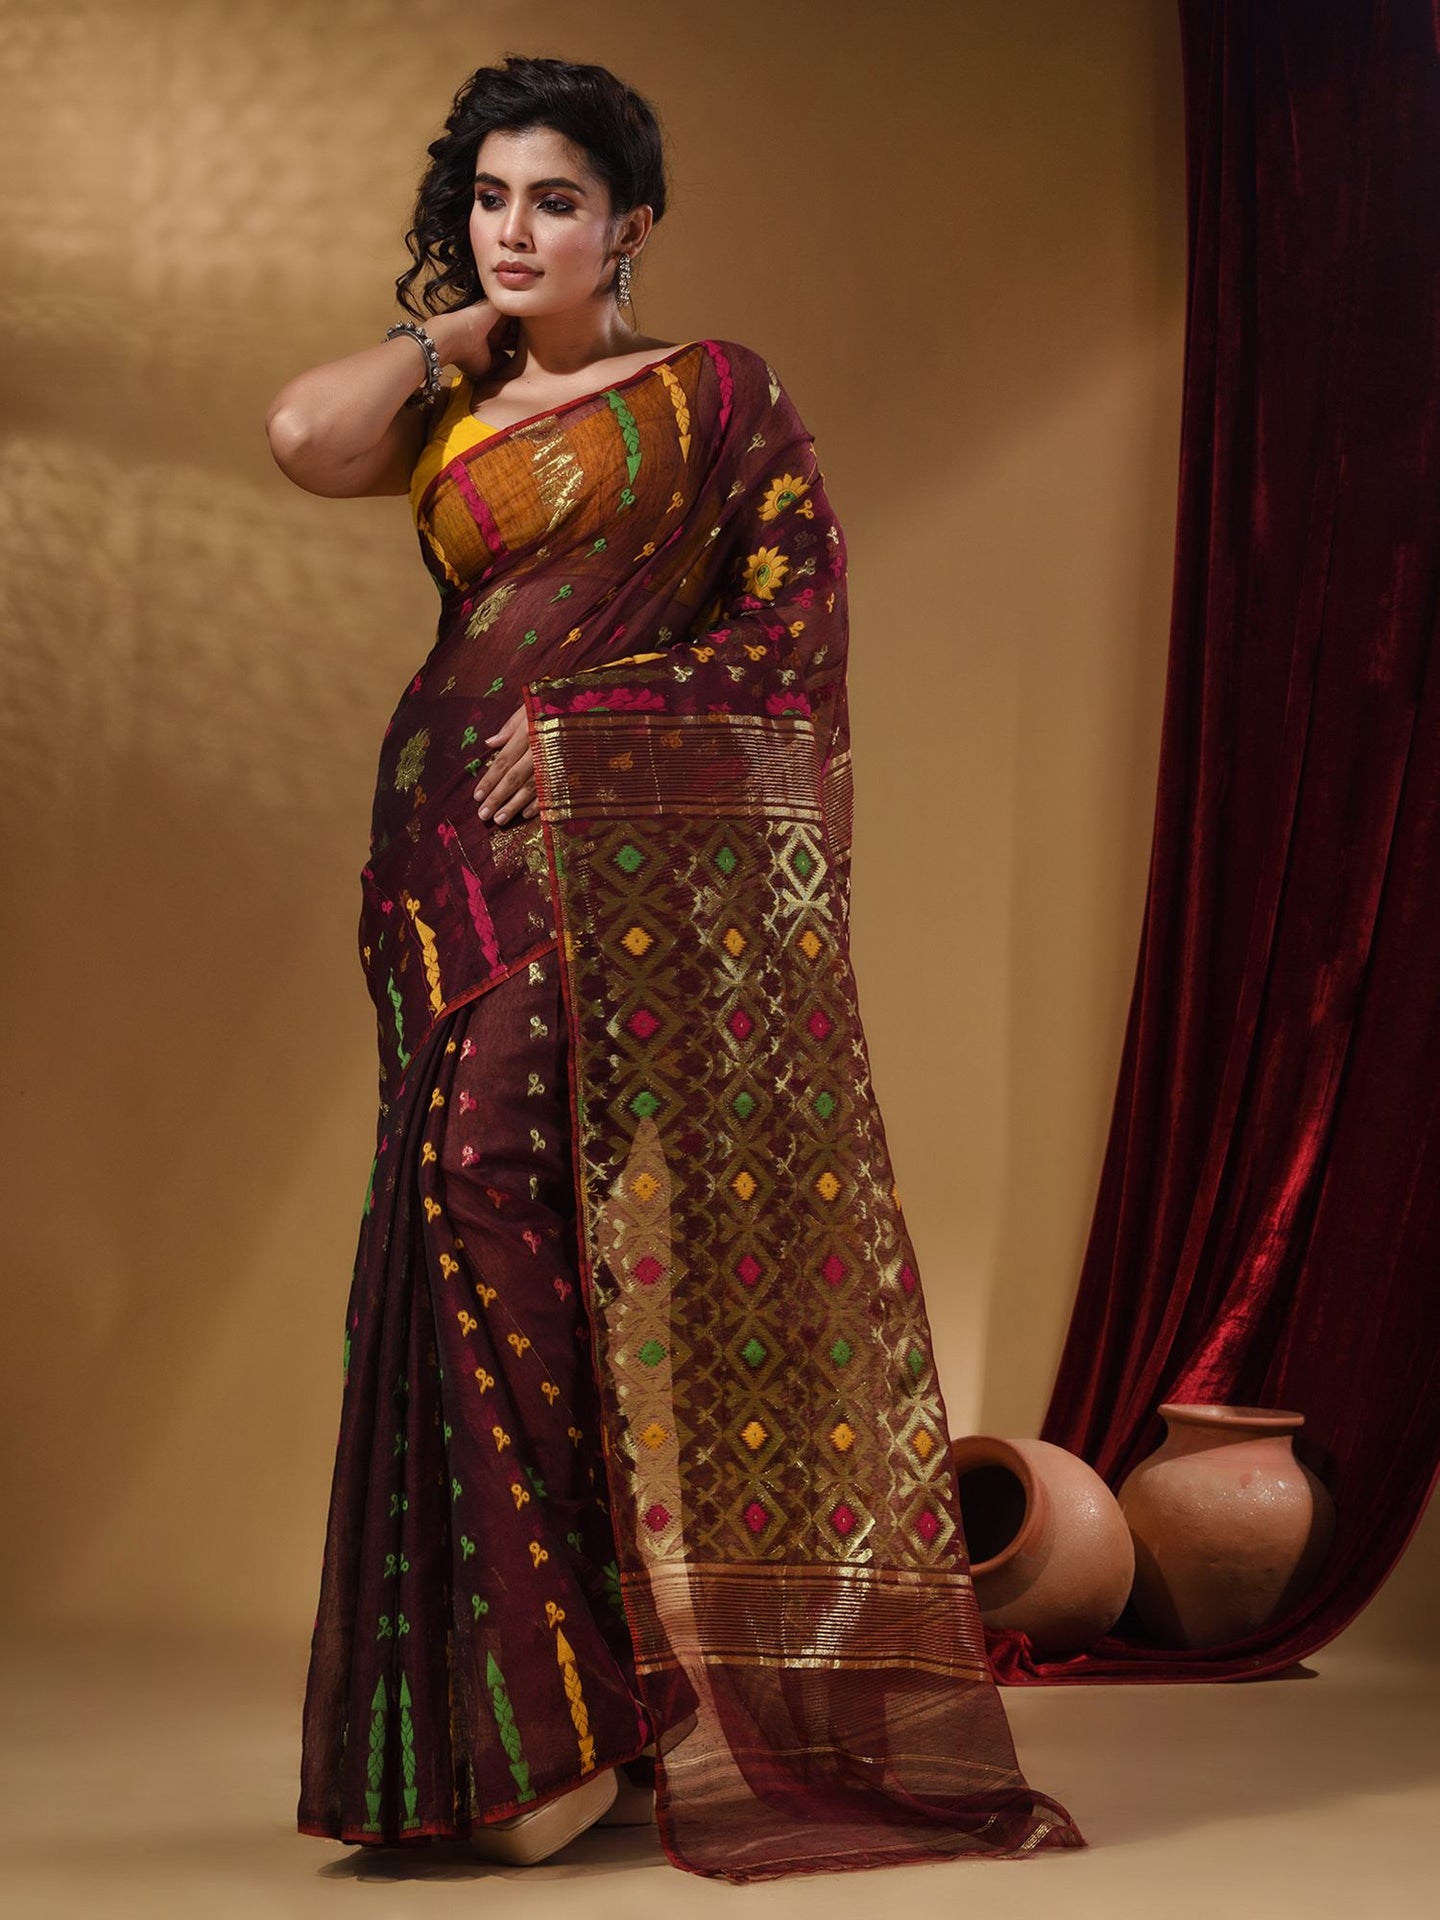 Maroon Cotton Handwoven Jamdani Saree With Multicolor Floral Designs And Motifs